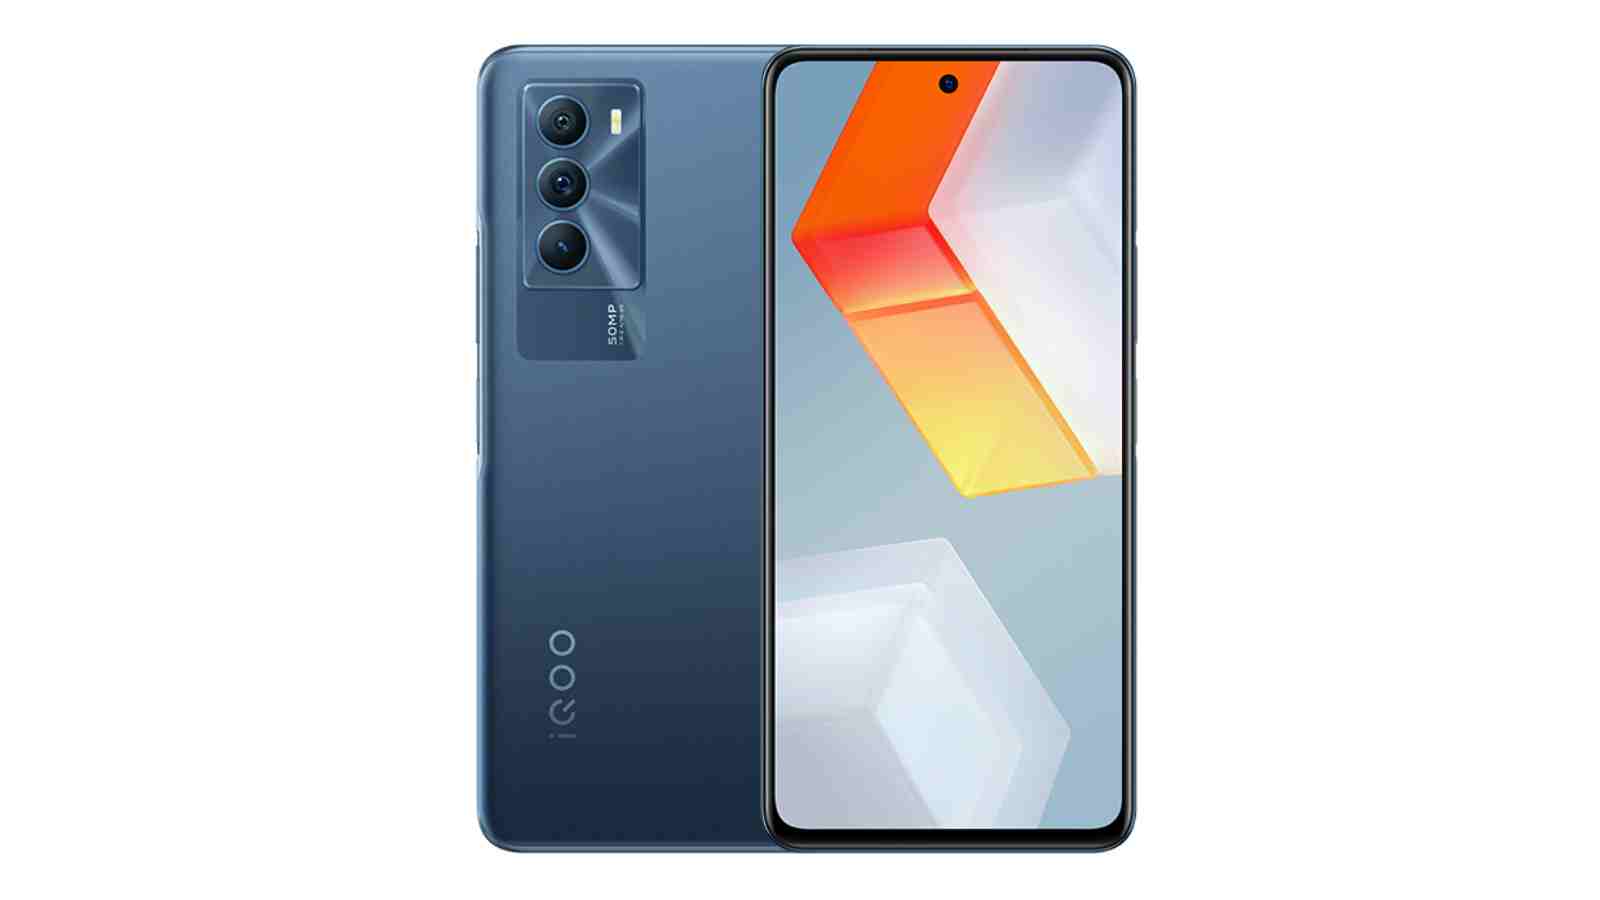 iQOO Neo 5 SE with Snapdragon 870, 144Hz LCD display launched: Price, Specifications